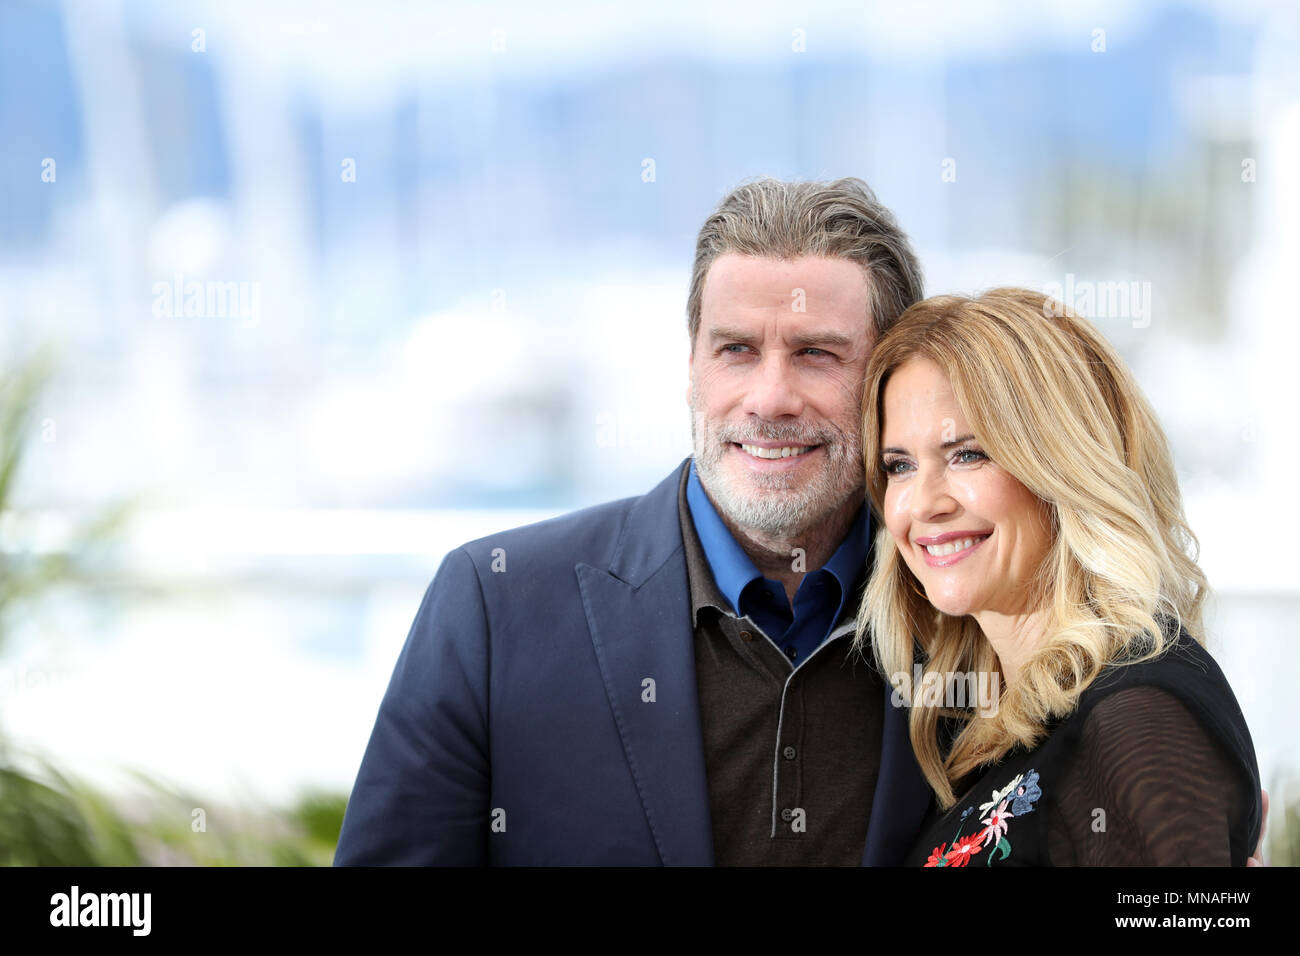 Cannes, France. 15th May, 2018. Actor John Travolta and his wife Kelly Preston pose during a photocall for the film 'Gotti' at the 71st Cannes International Film Festival in Cannes, France, on May 15, 2018. The 71st Cannes International Film Festival is held from May 8 to May 19. Credit: Luo Huanhuan/Xinhua/Alamy Live News Stock Photo